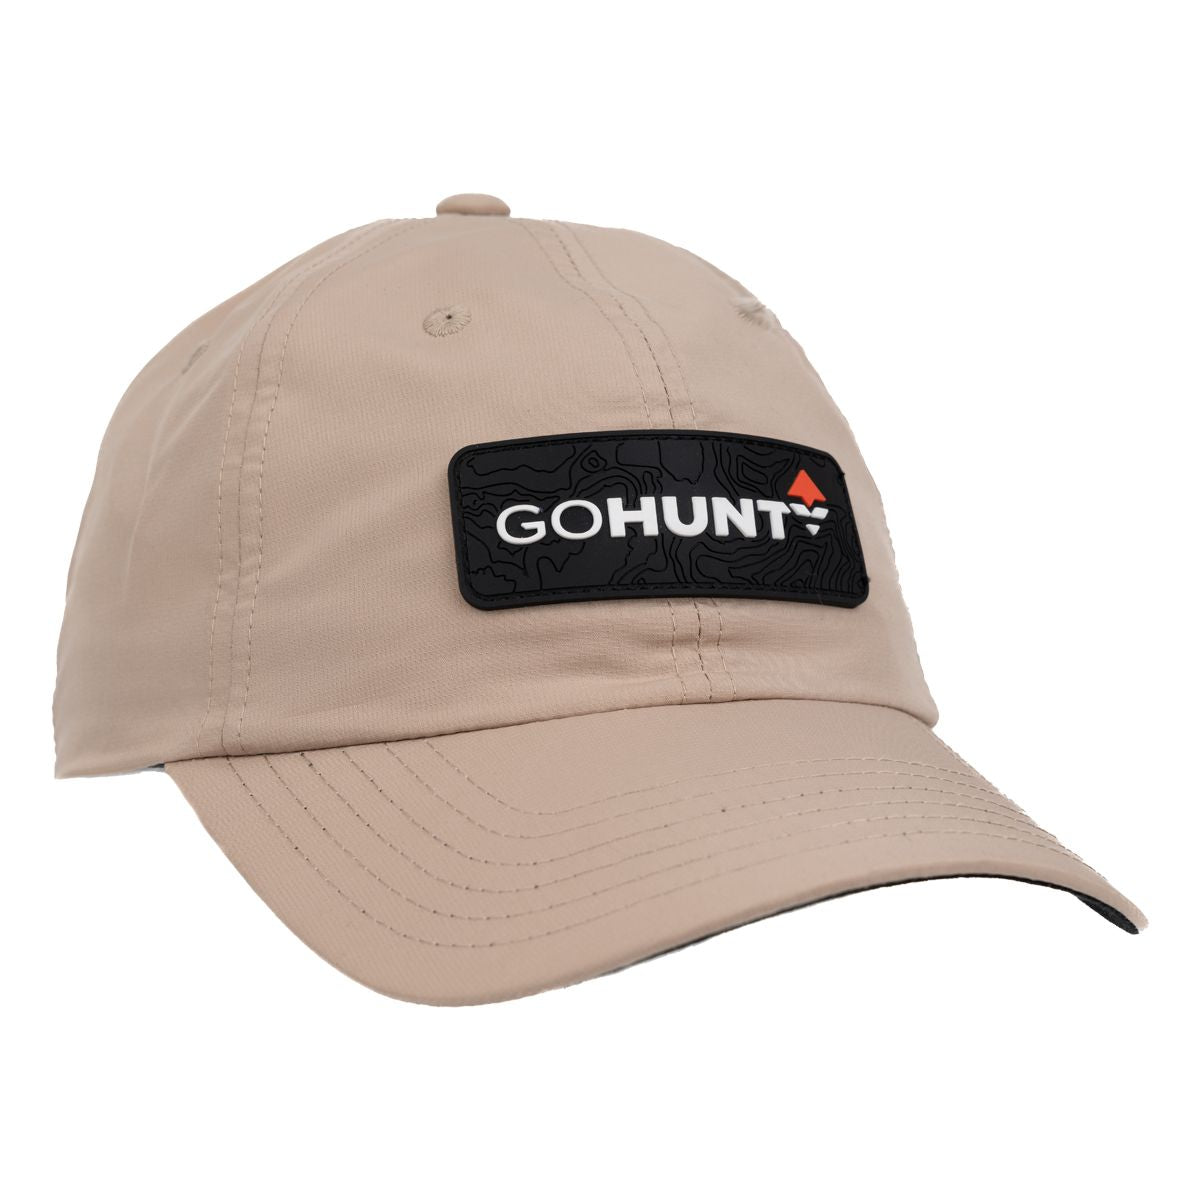 GOHUNT Topo DH Hat in Sand by GOHUNT | GOHUNT - GOHUNT Shop